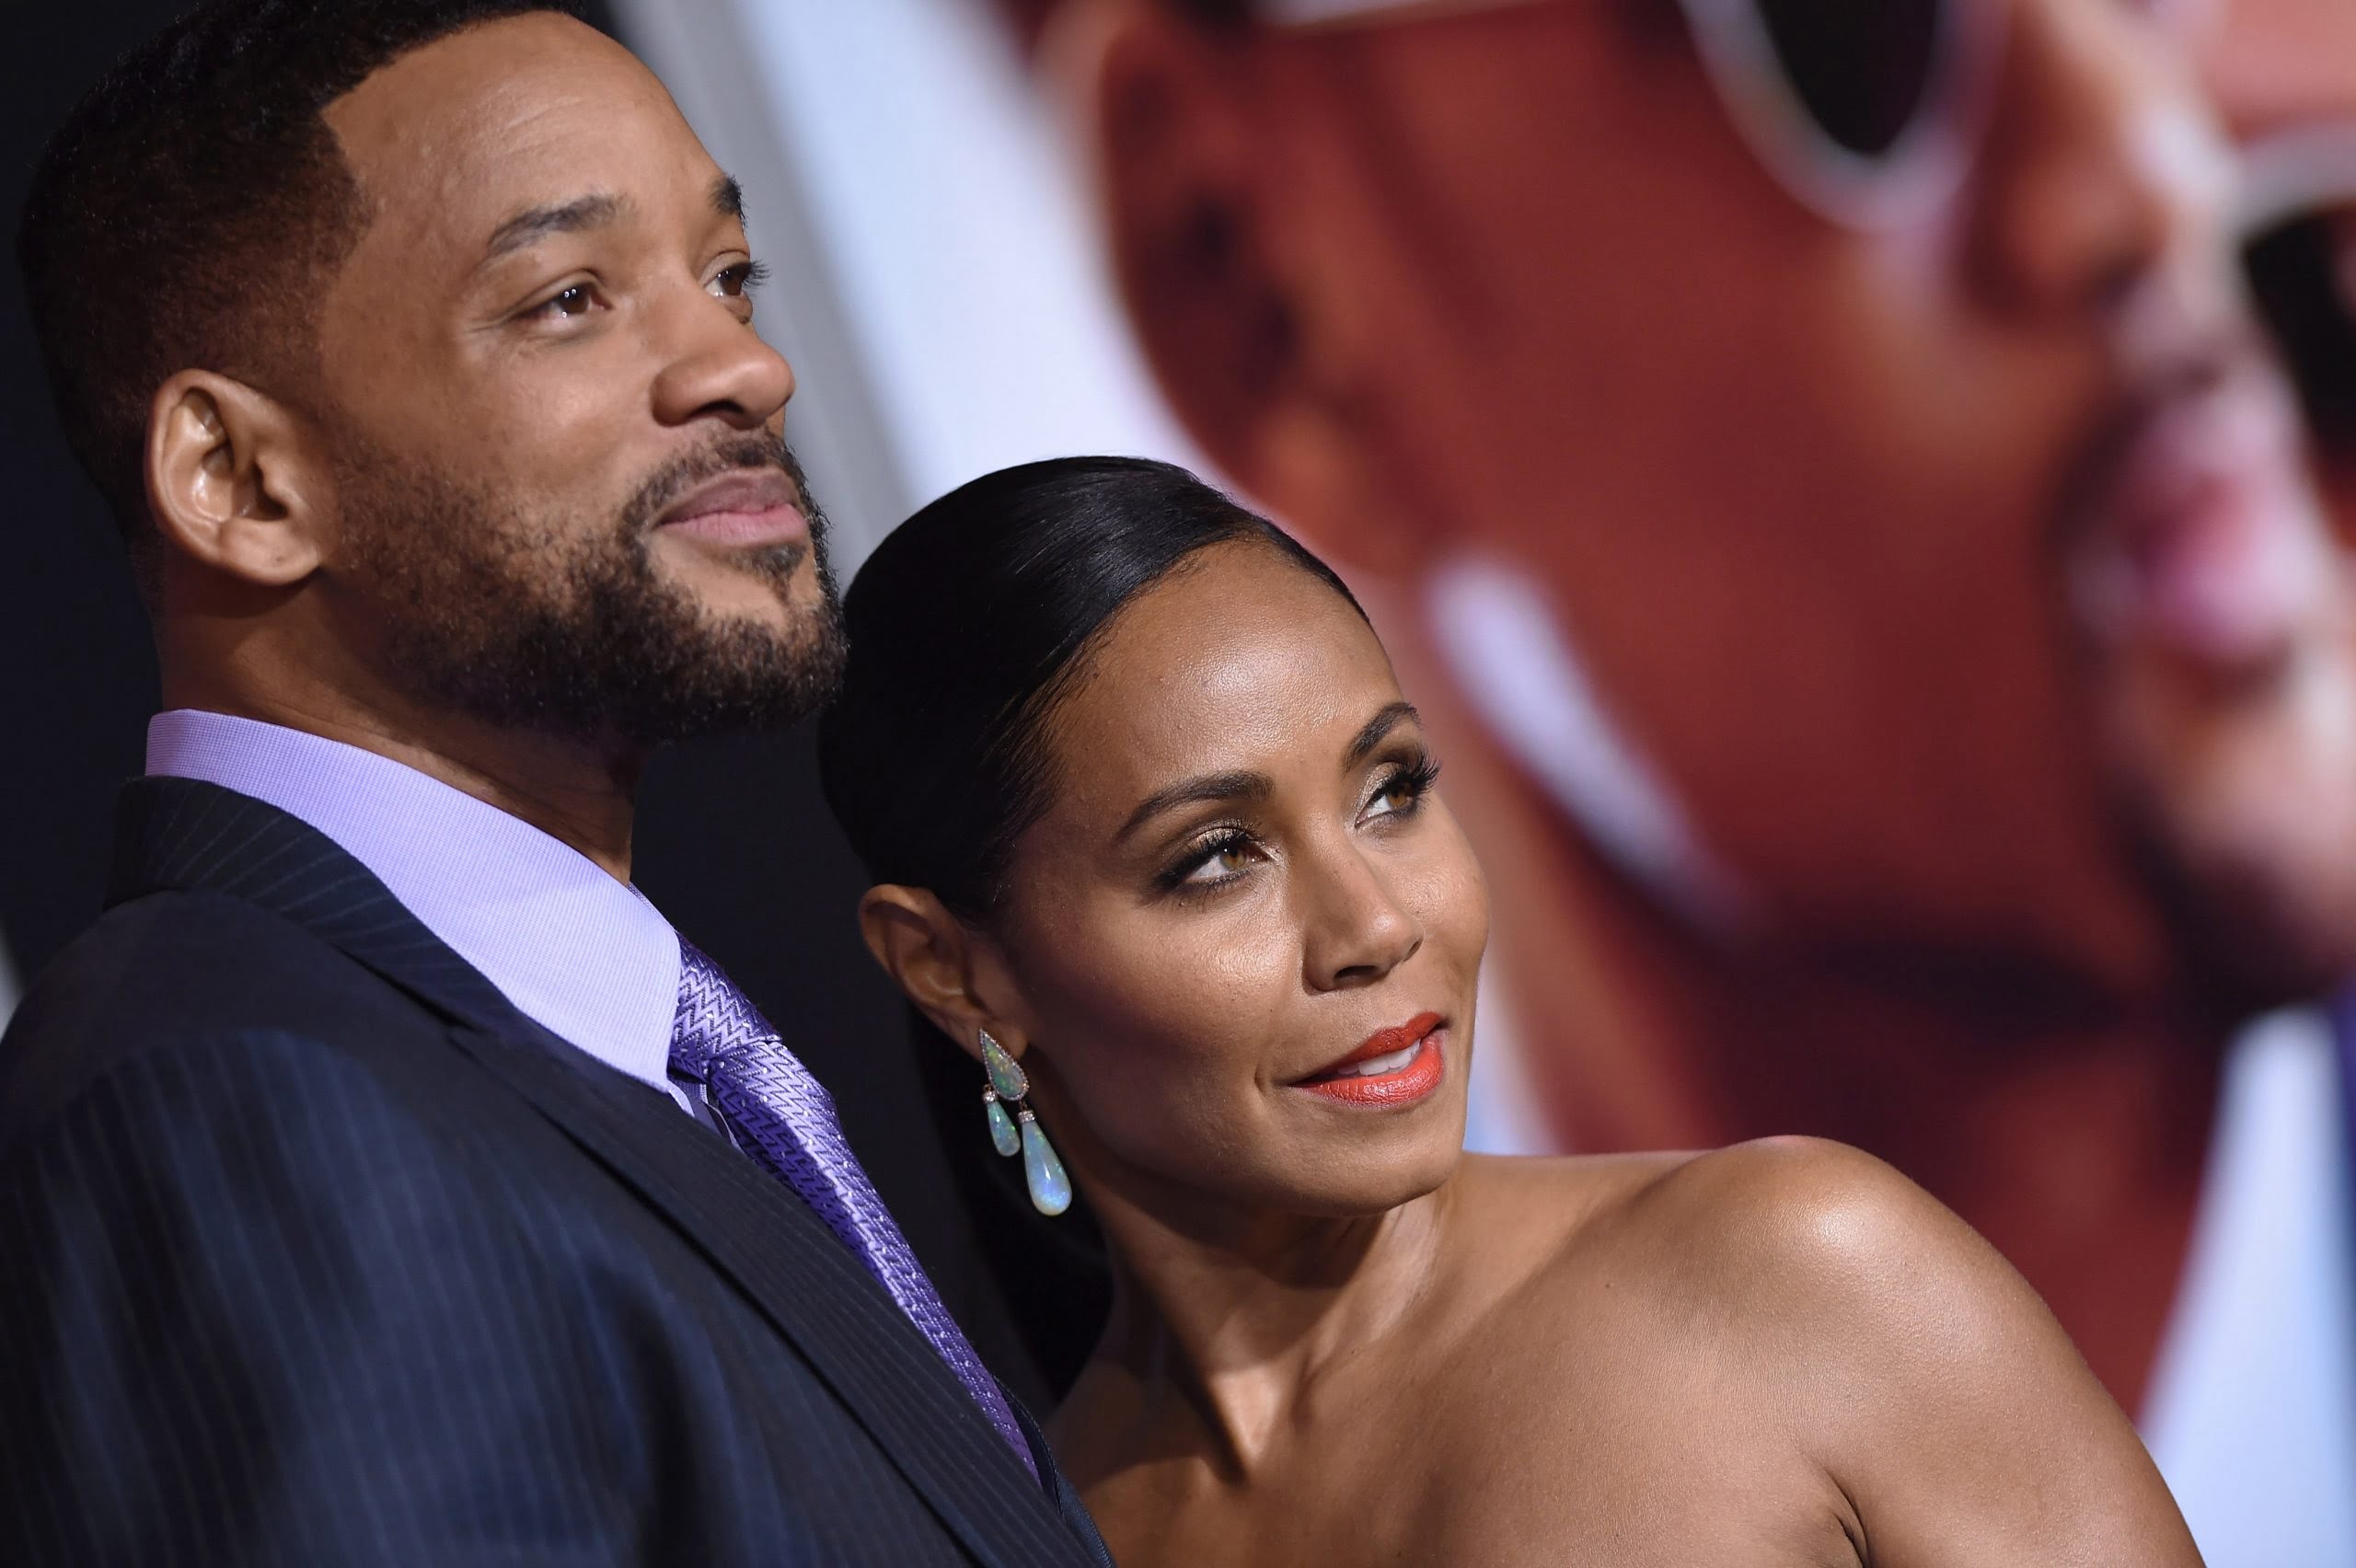 Will Smith and Jada Pinkett DIVORCE CONFIRMED by This Leak, Everything You Need to Know - Dominique Clare